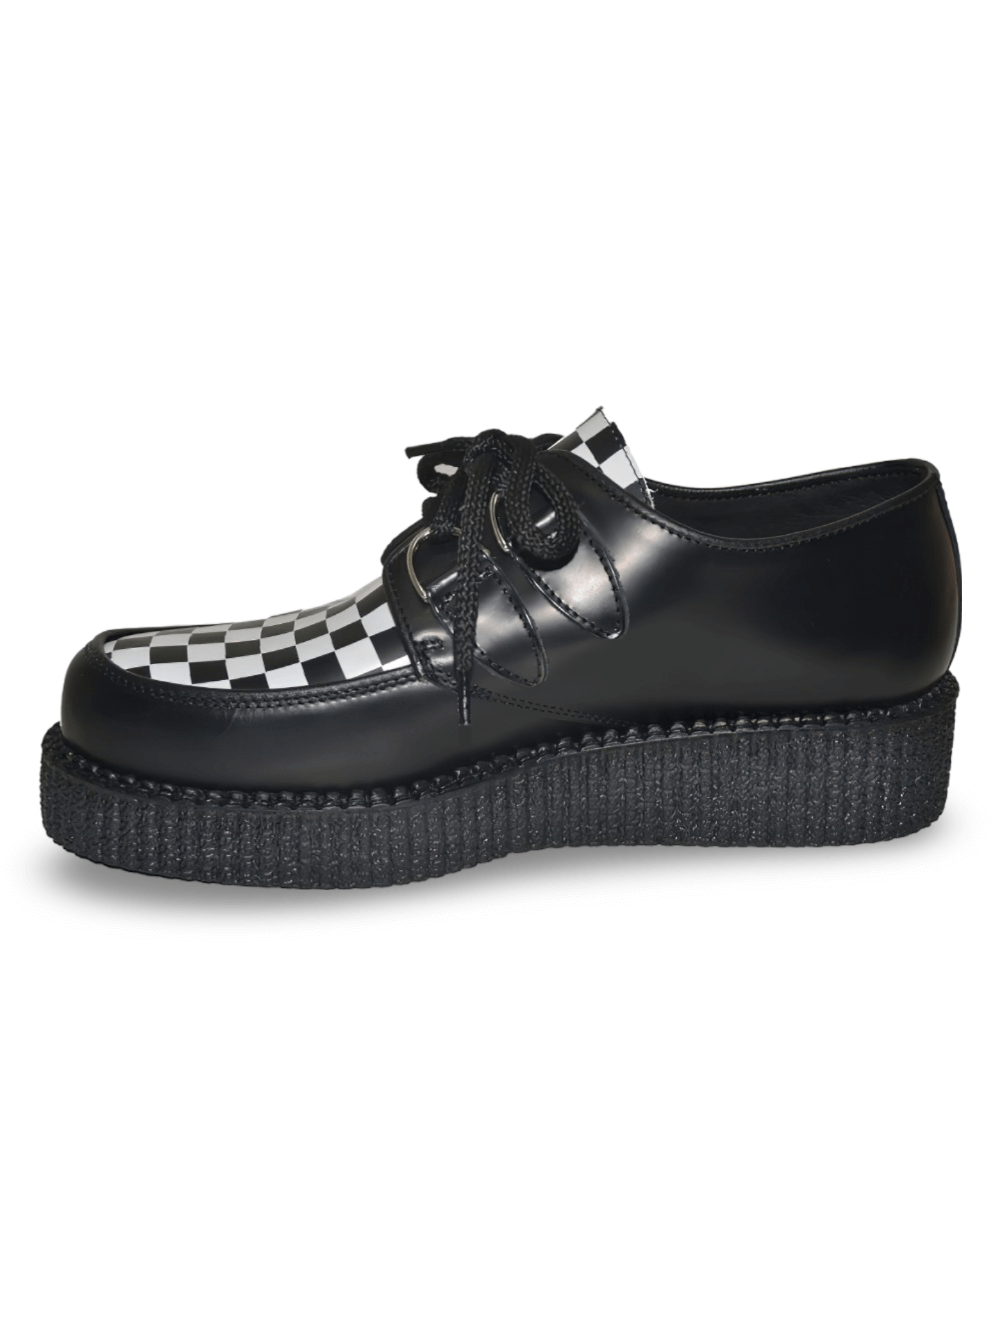 Checkerwork Black And White Creepers With Lace-Up